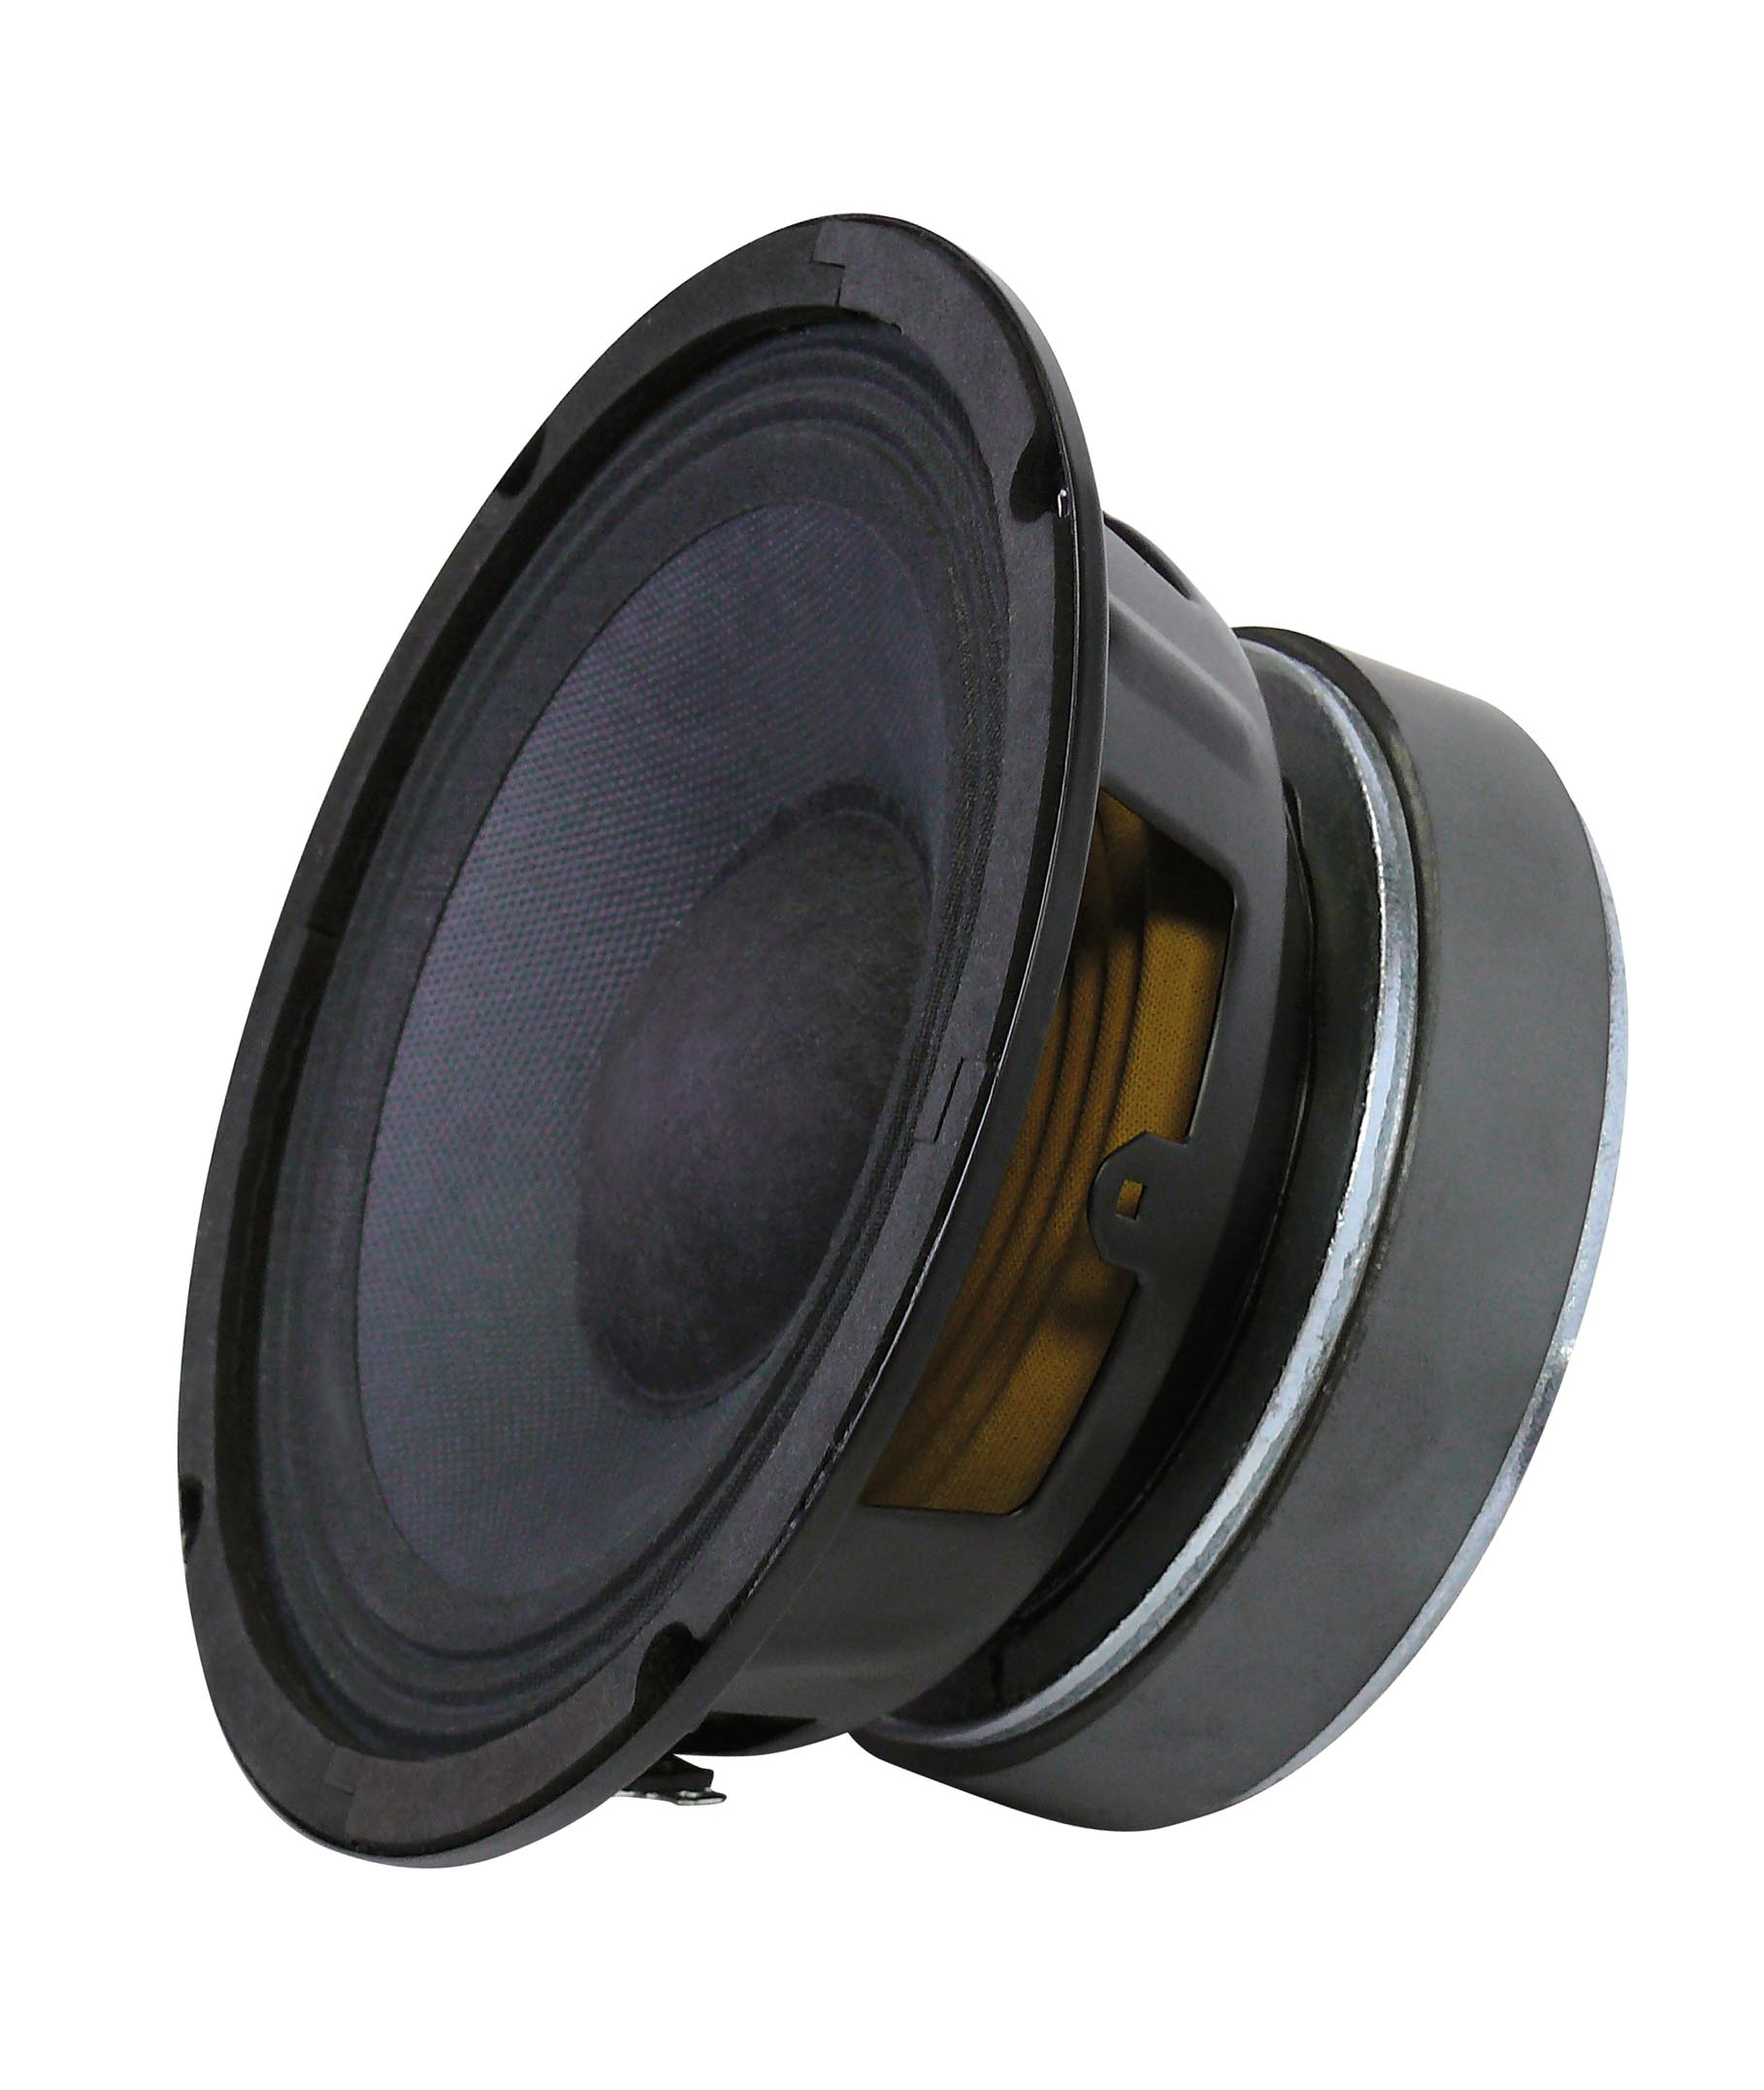 McGee PA Subwoofer 165 mm